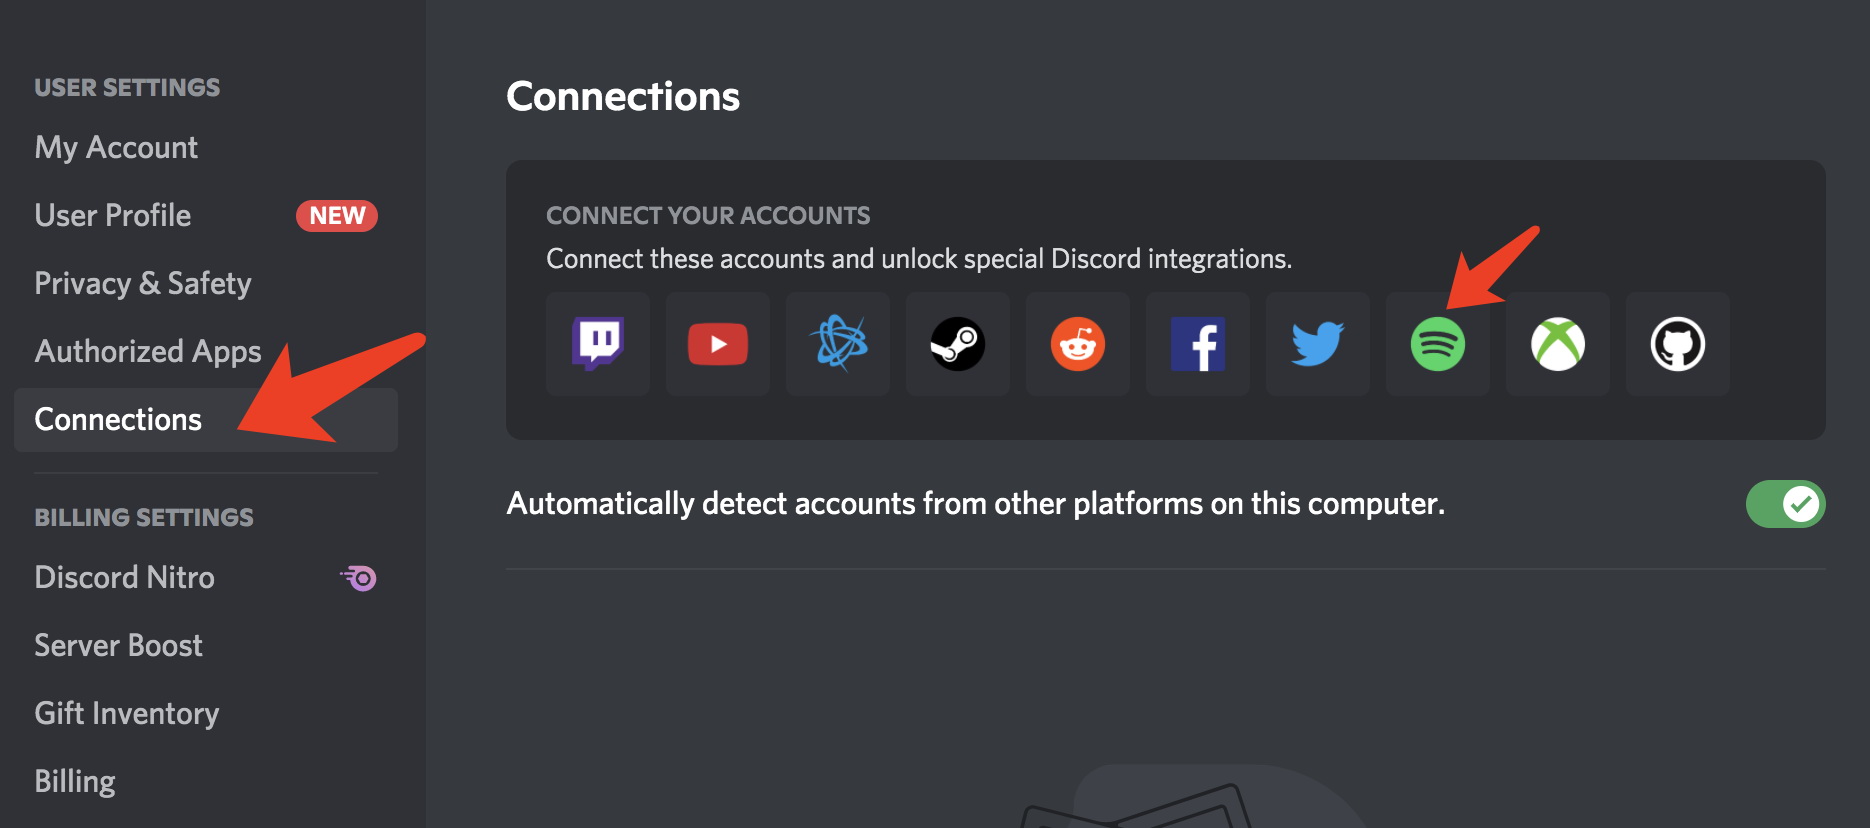 How-to-share-spotify-on-discord-desktop  